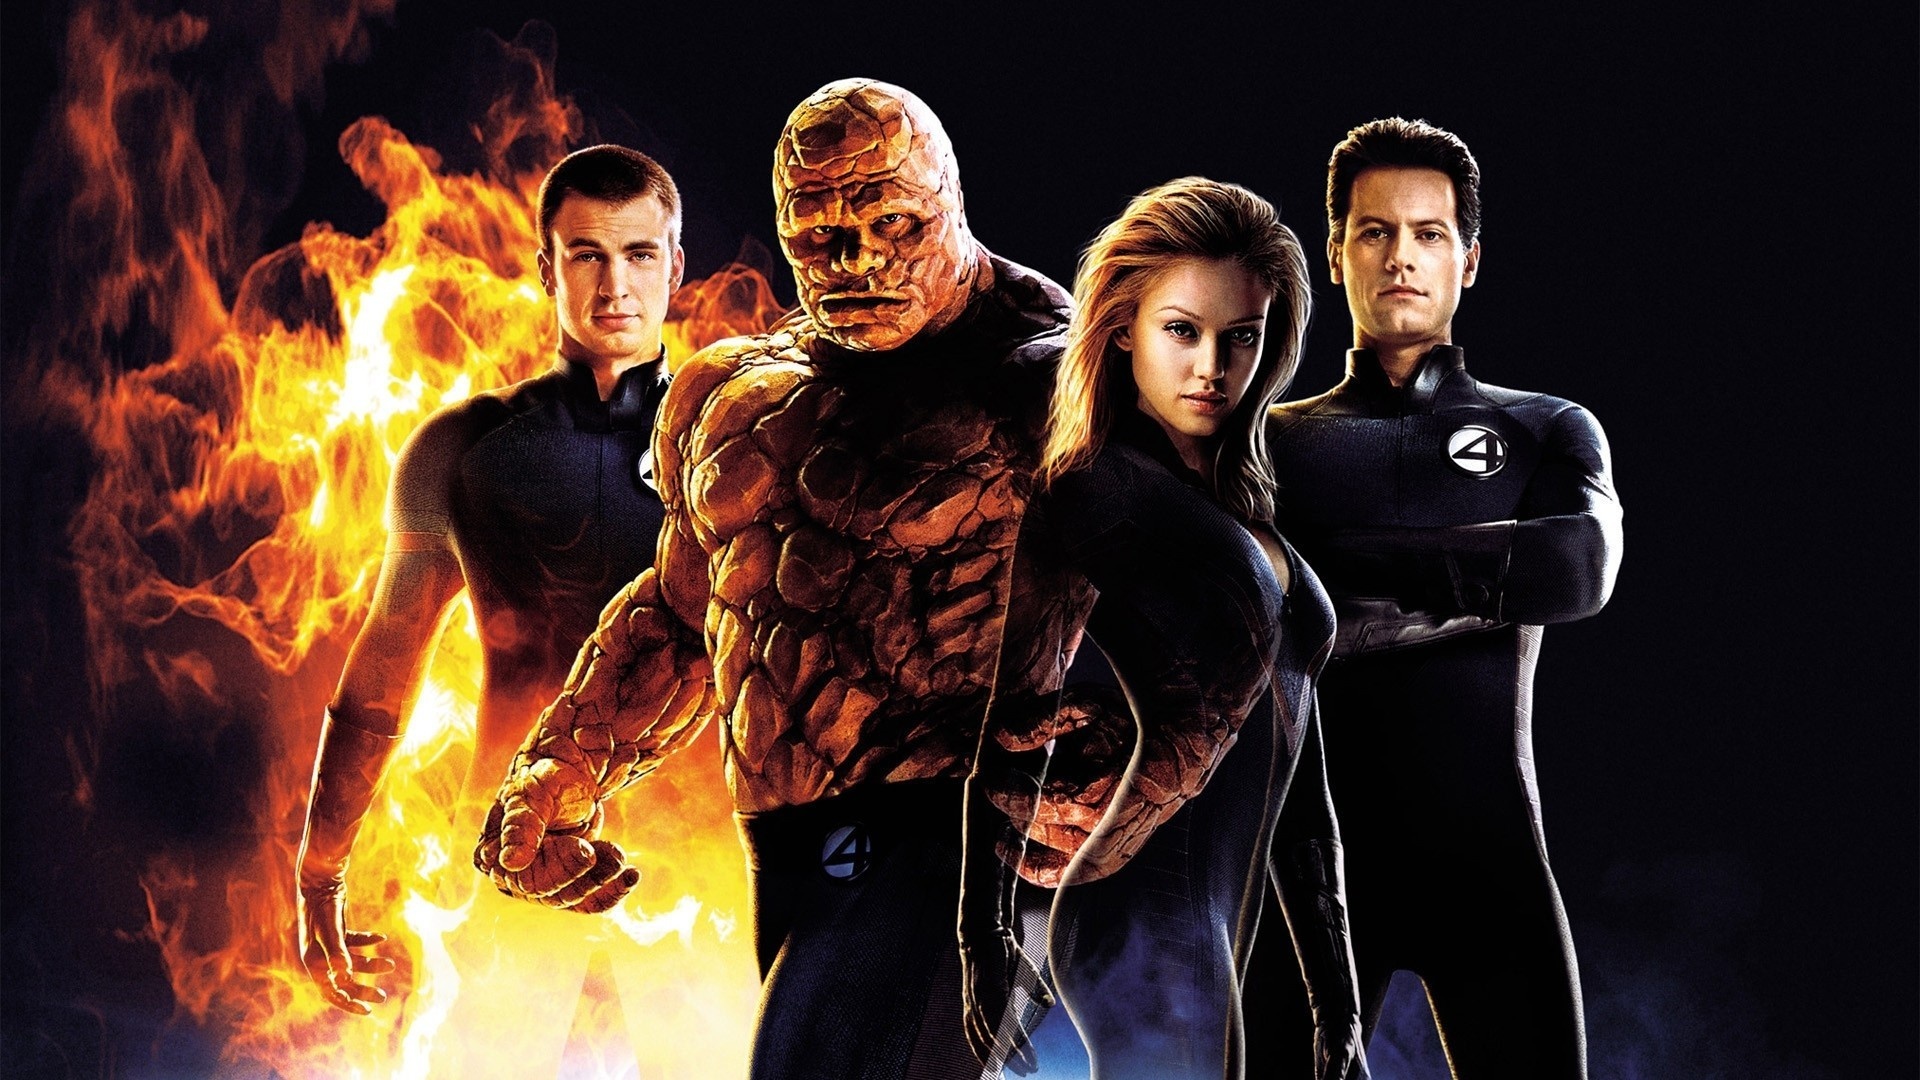 Movies fantastic four, Jessica Alba as invisible woman, Chris Evans as human torch, Wallpaper resolution, 1920x1080 Full HD Desktop